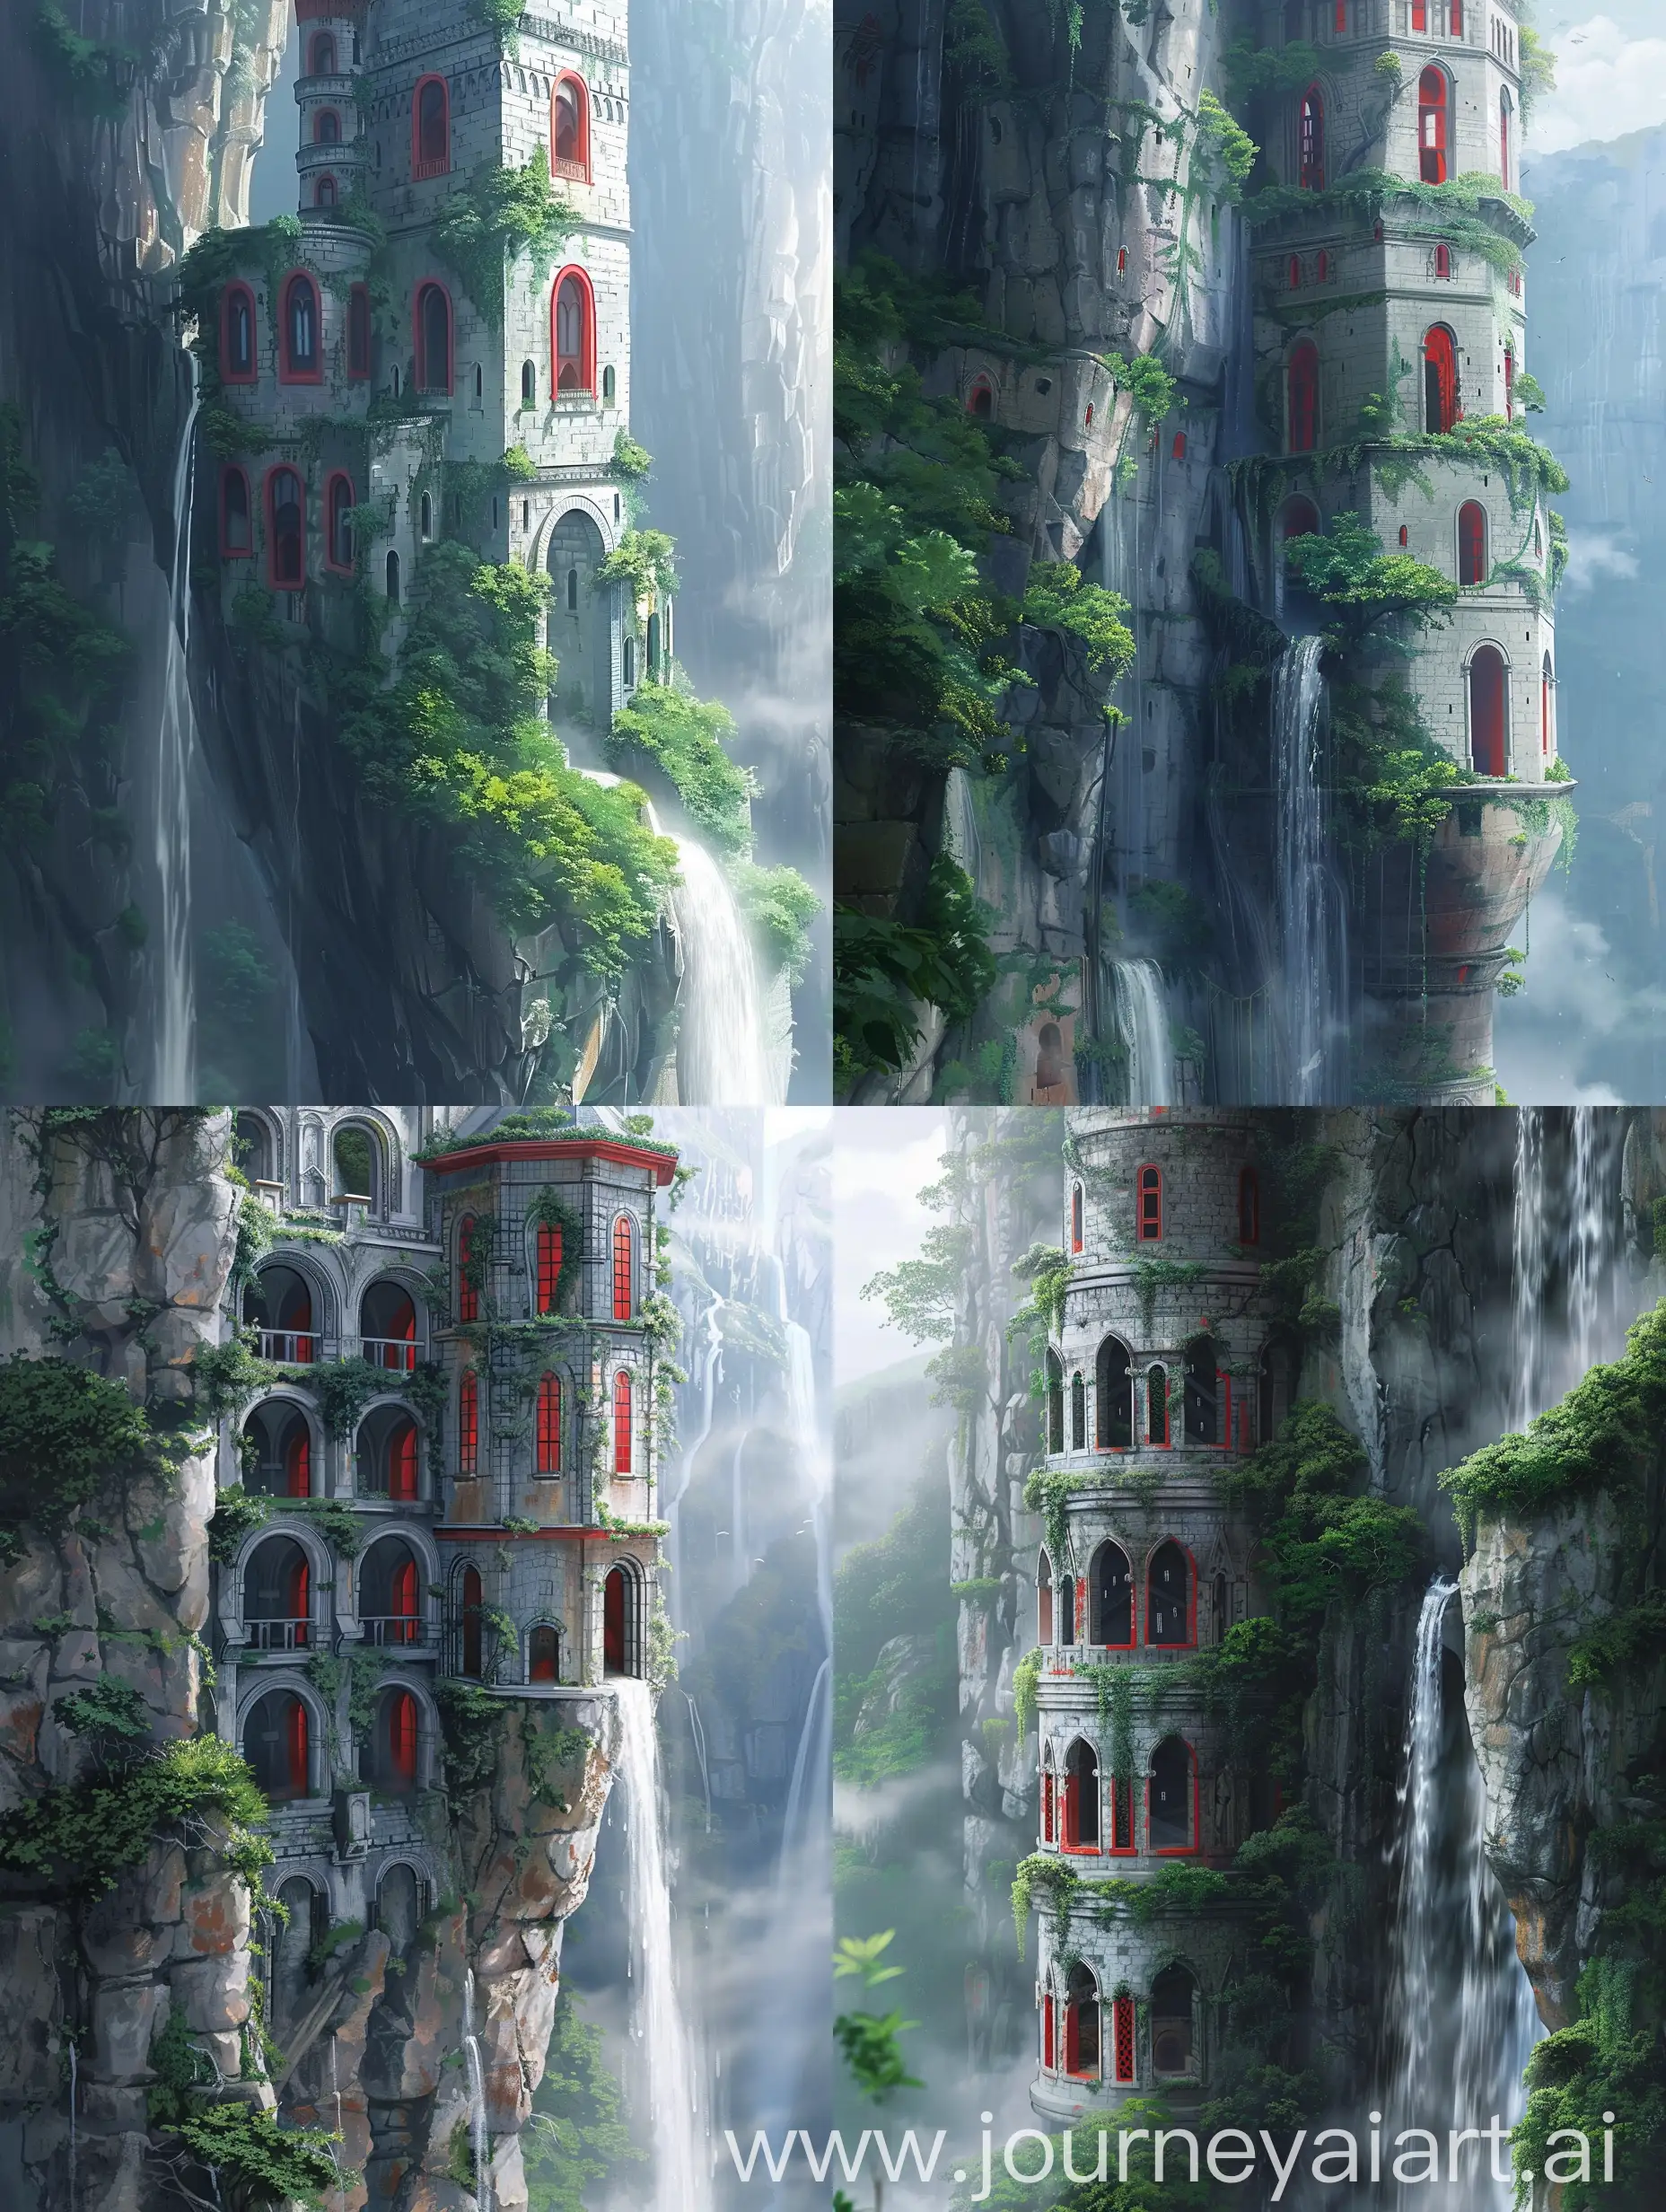 Ghibli anime style,anime,Makoto Shinkai.White tower is tall and multi-leveled, with a design that suggests medieval influences. It's constructed into the side of a steep cliff, featuring stone walls and arched windows. The uppermost level is capped with a conical roof.:The tower has red accents around some windows, contrasting with the gray stone. Lush greenery envelops the cliff's base and climbs around the structure, blending the man-made and natural elements seamlessly. Adjacent to the tower is a breathtaking waterfall, which plummets from the cliff's summit into a misty void below, adding a sense of grandeur and power to the scene. The entire scene is illuminated by soft sunlight that filters through a hazy sky, imparting an ethereal and otherworldly quality to the scene,vibrant,cinematic